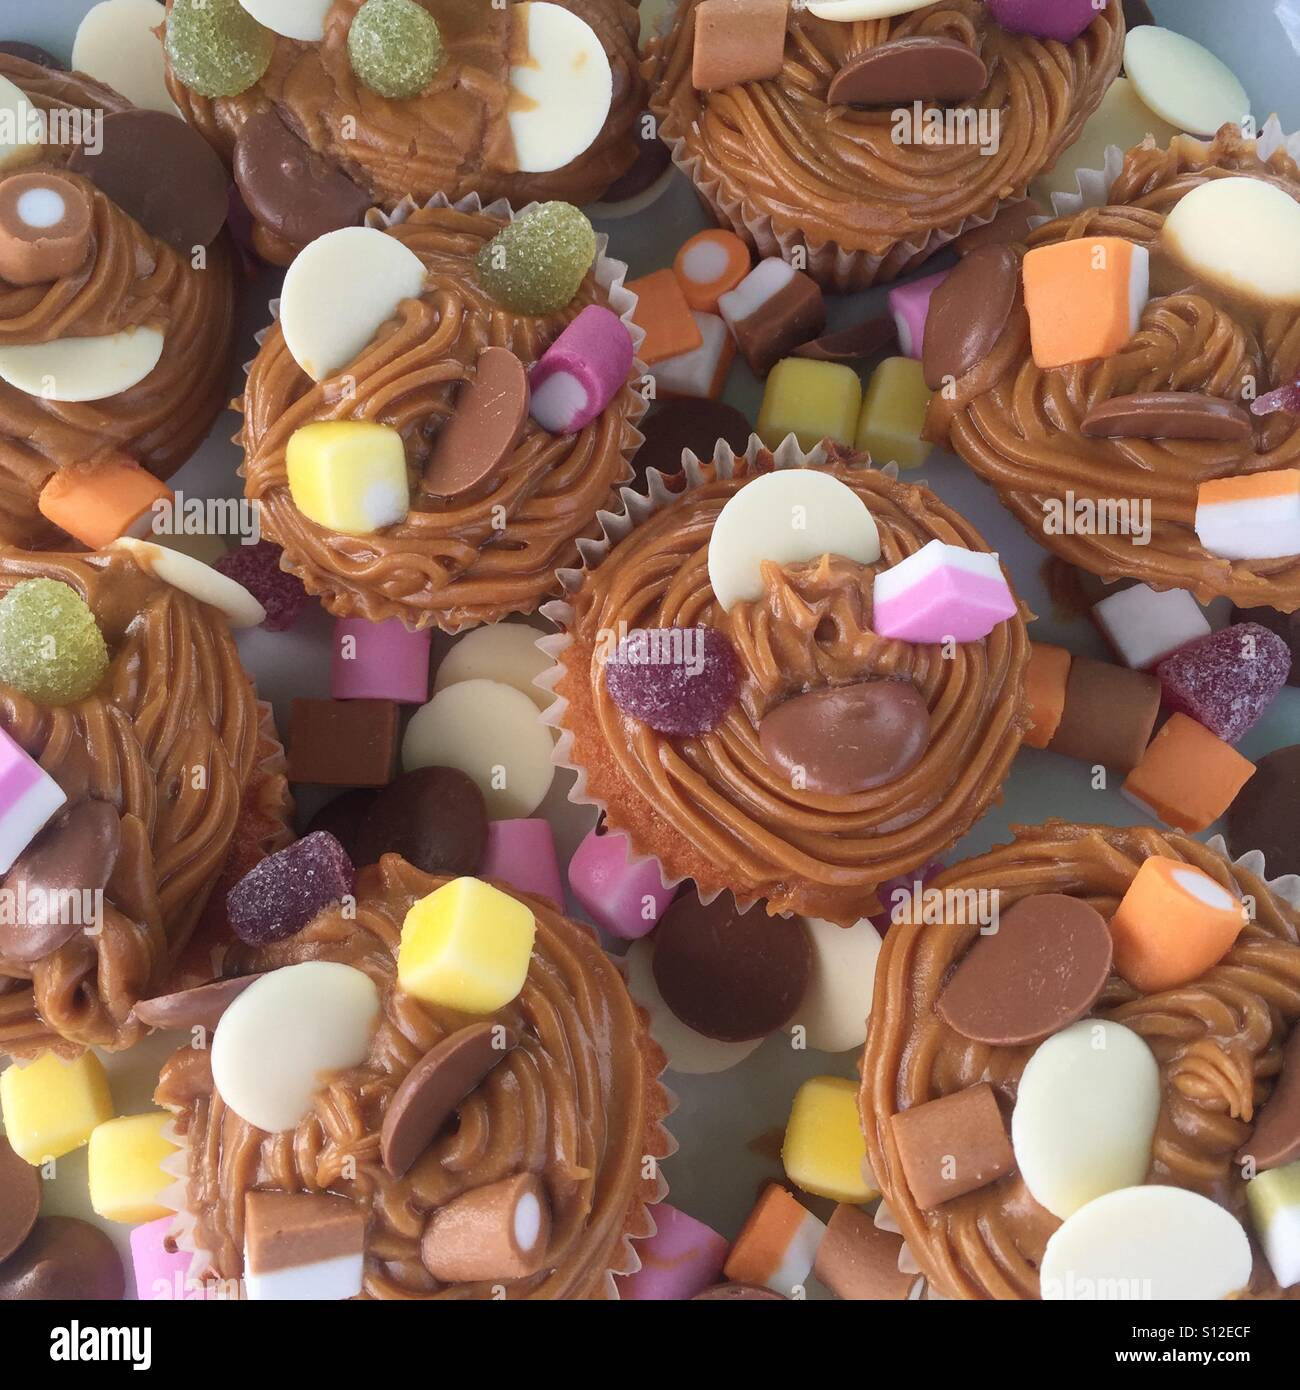 Chocolate cup cakes with dolly mixtures on top Stock Photo